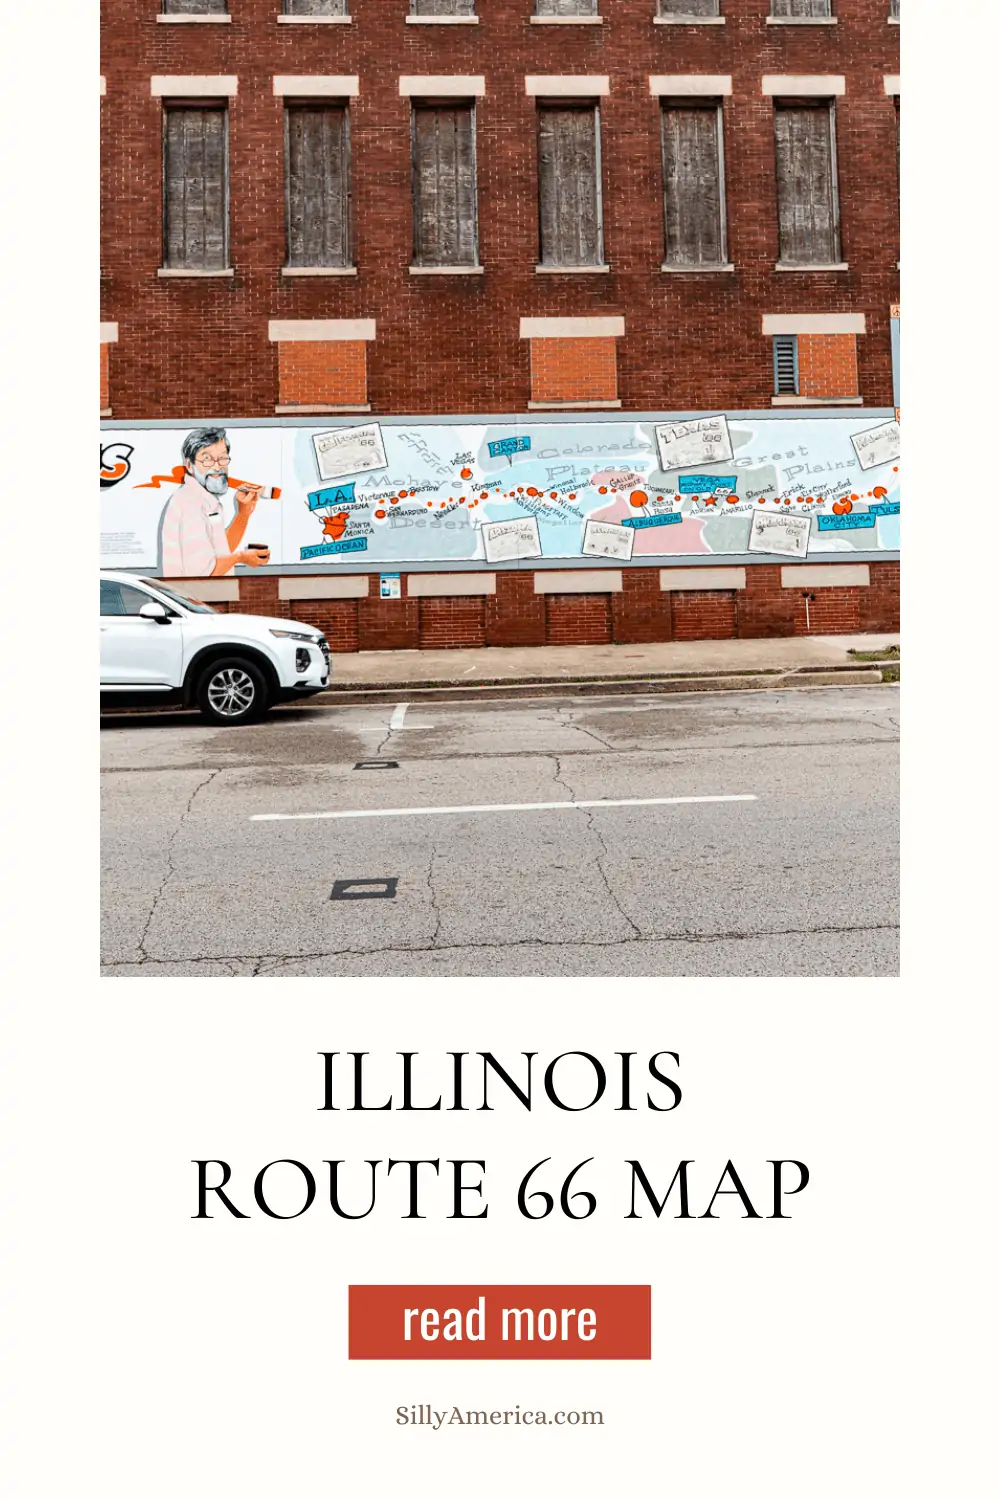 If you're planning a Route 66 road trip you need to know what to see and where to go. Our Illinois Route 66 map contains all the best stops in the state. We've mapped out all the biggest and best roadside attractions, visitor centers, museums, parks, themed gas stations, restaurants, diners, fast food, vintage motels, and other iconic stops on this Route 66 Illinois map. #Route66 #Illinois #Route66RoadTrip #IllinoisRoute66 #IllinoisRoute66RoadTrip #IllinoisRoadTrip #travel #RoadTrip